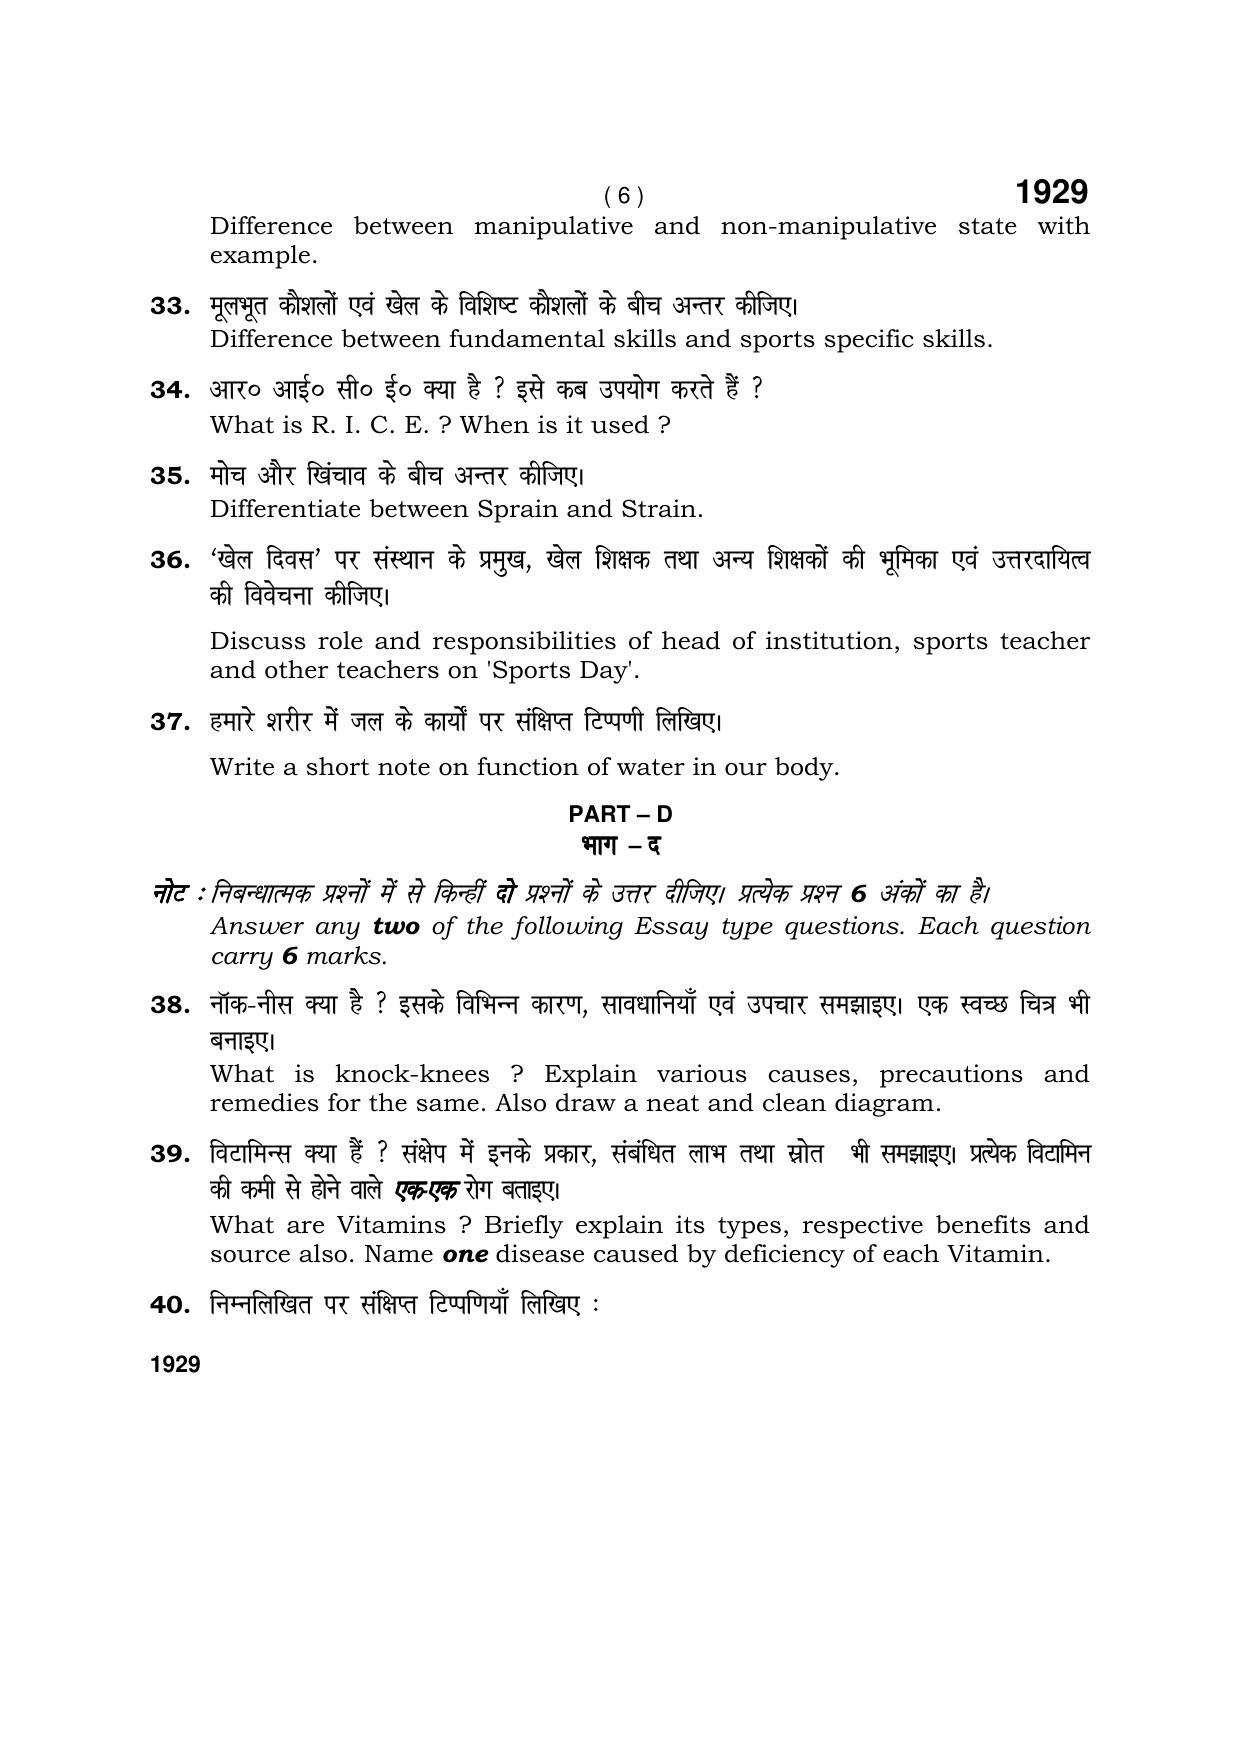 Haryana Board HBSE Class 10 Physical Education & Sport 2017 Question Paper - Page 6